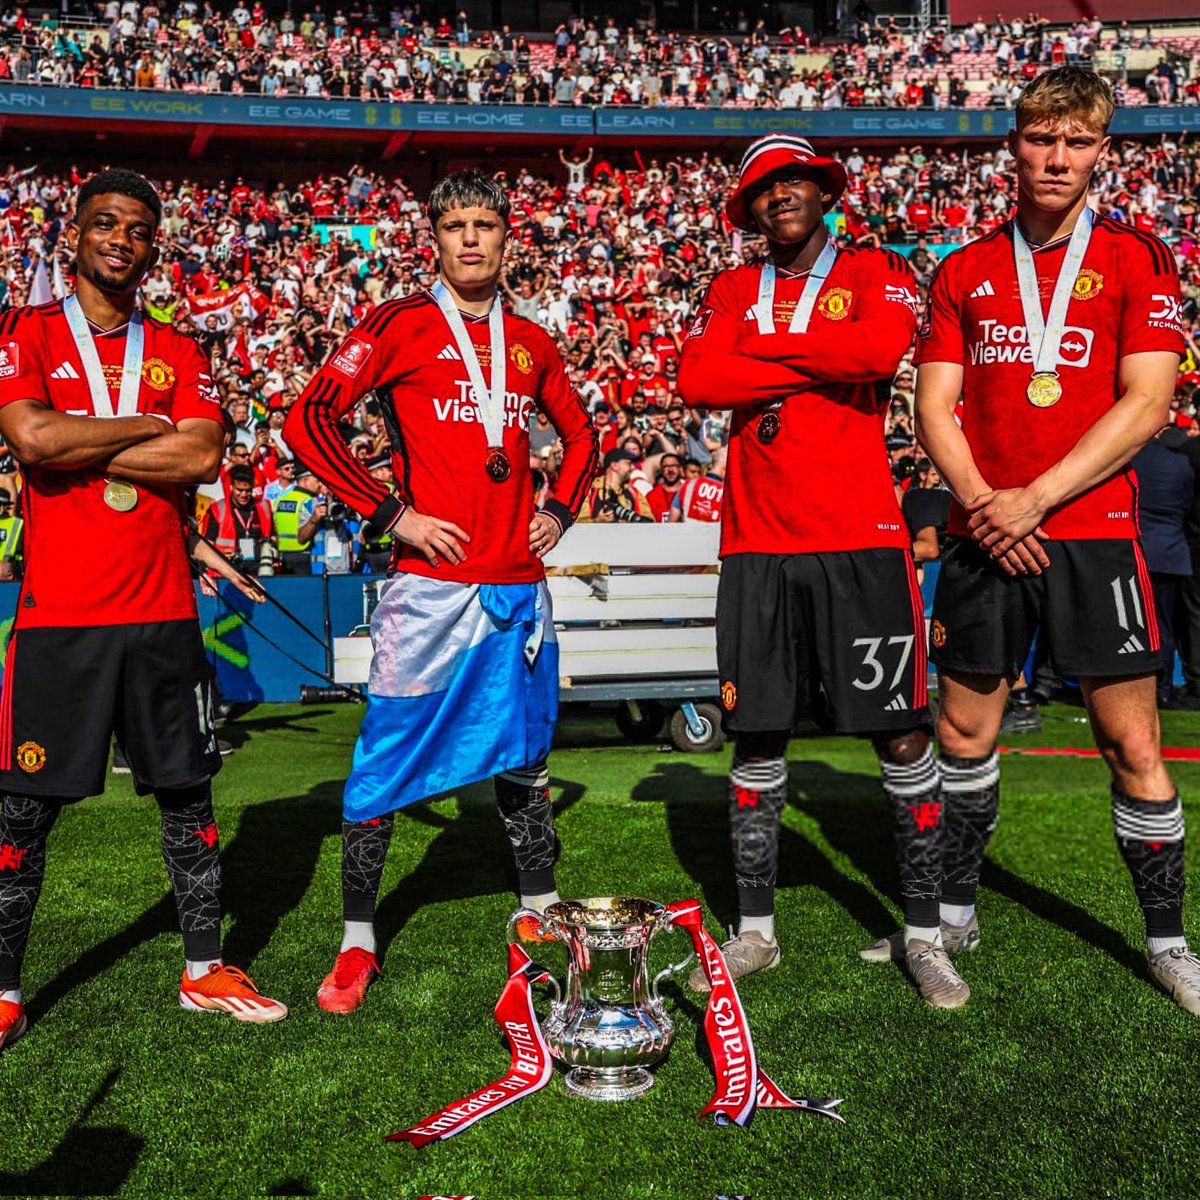 If you really think about it, FA cup is the best trophy in the world. 

700 plus teams can complete.
Oldest football competition.
Add more
#mufc
#FACUPWINNERS